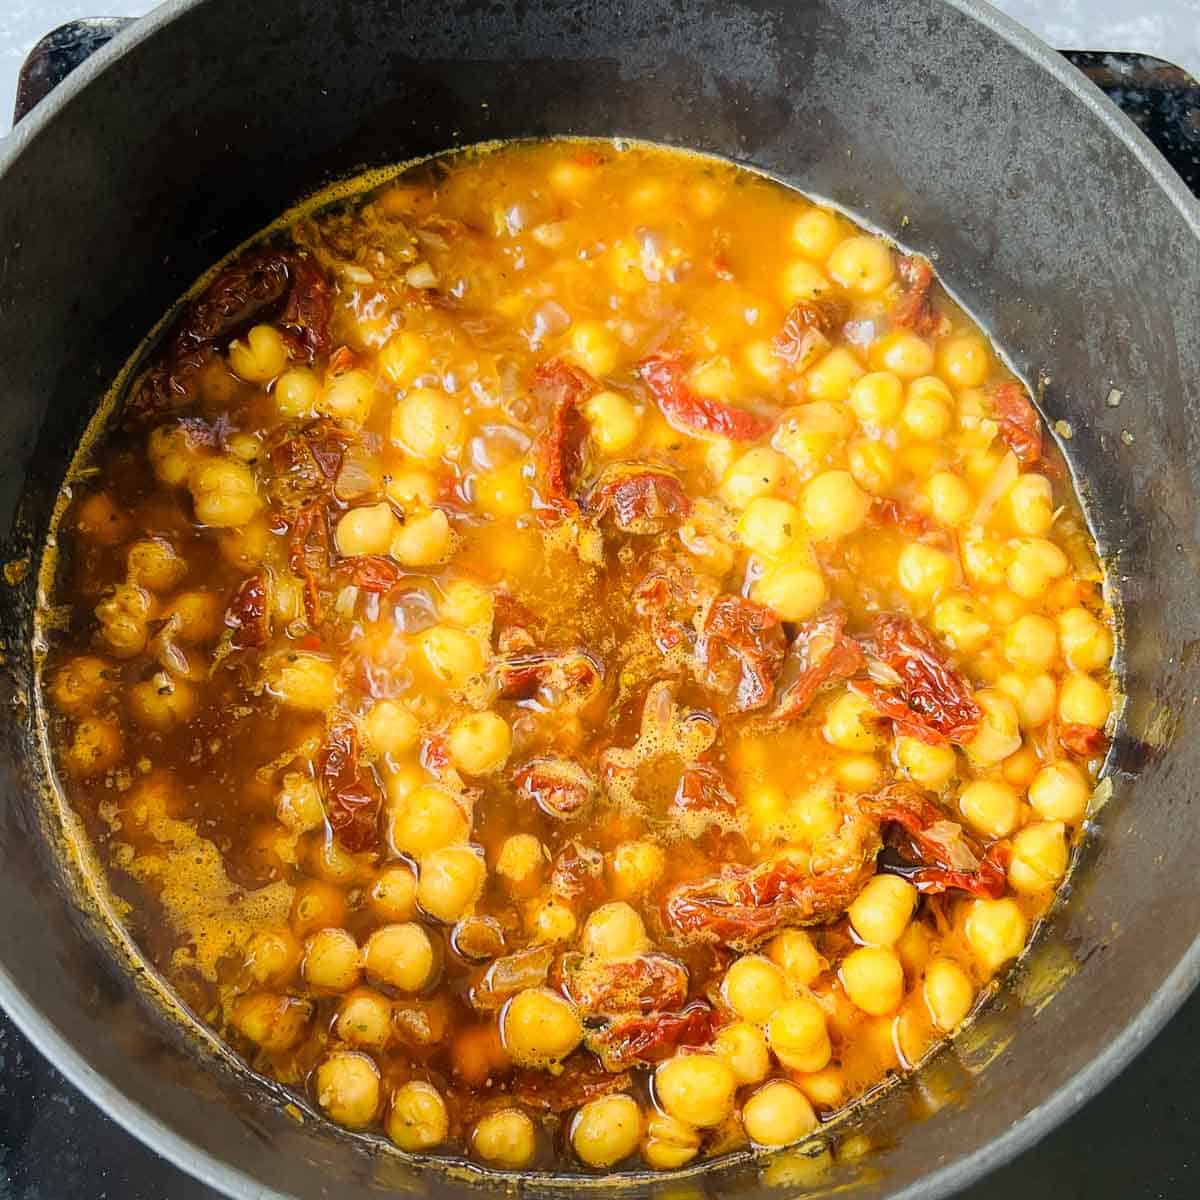 Chickpeas and spices simmering in Dutch oven.